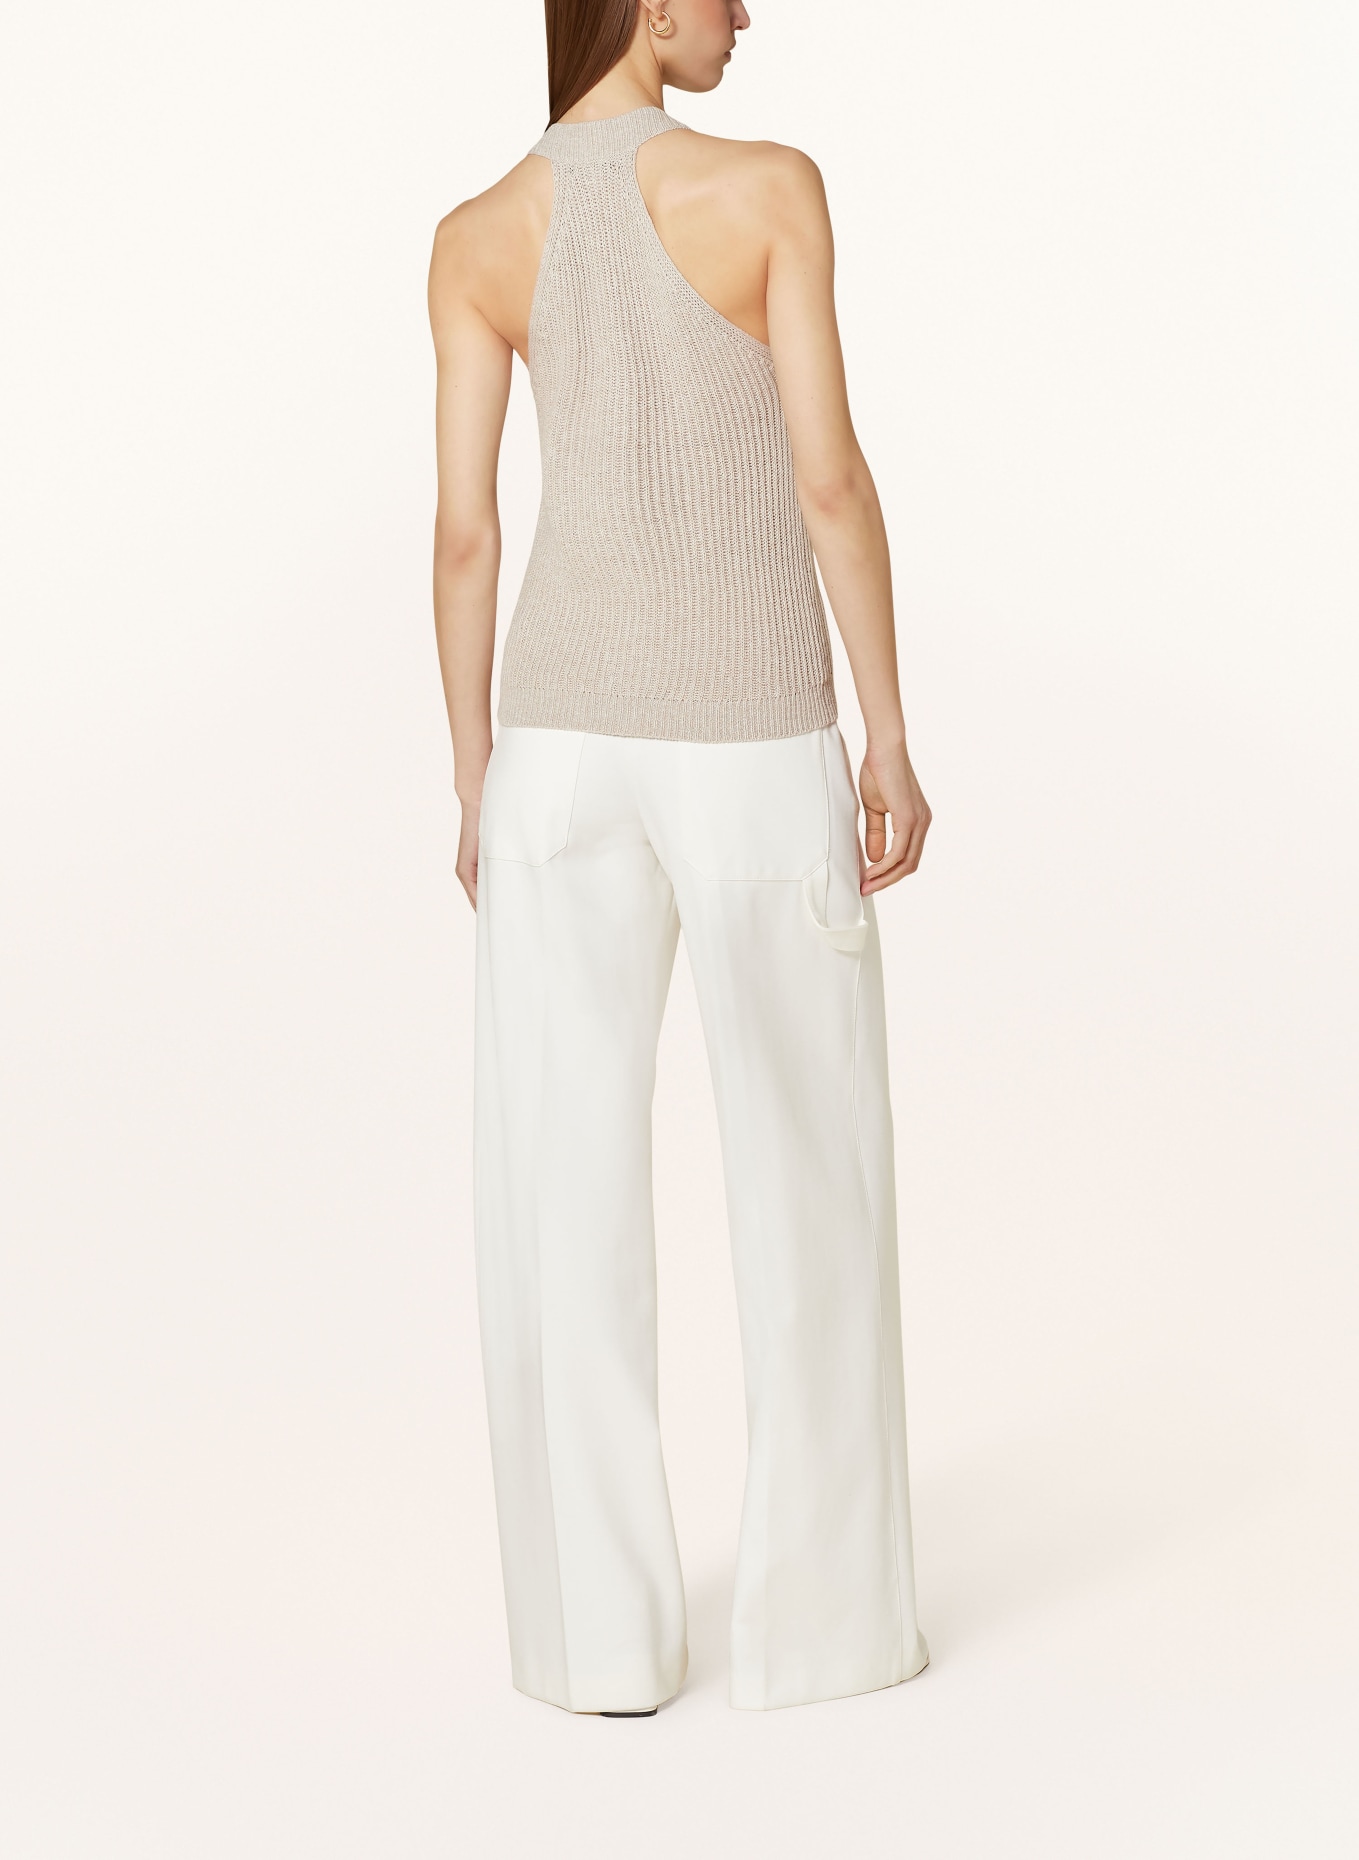 REISS Knit top SINEAD with linen, Color: LIGHT BROWN (Image 3)